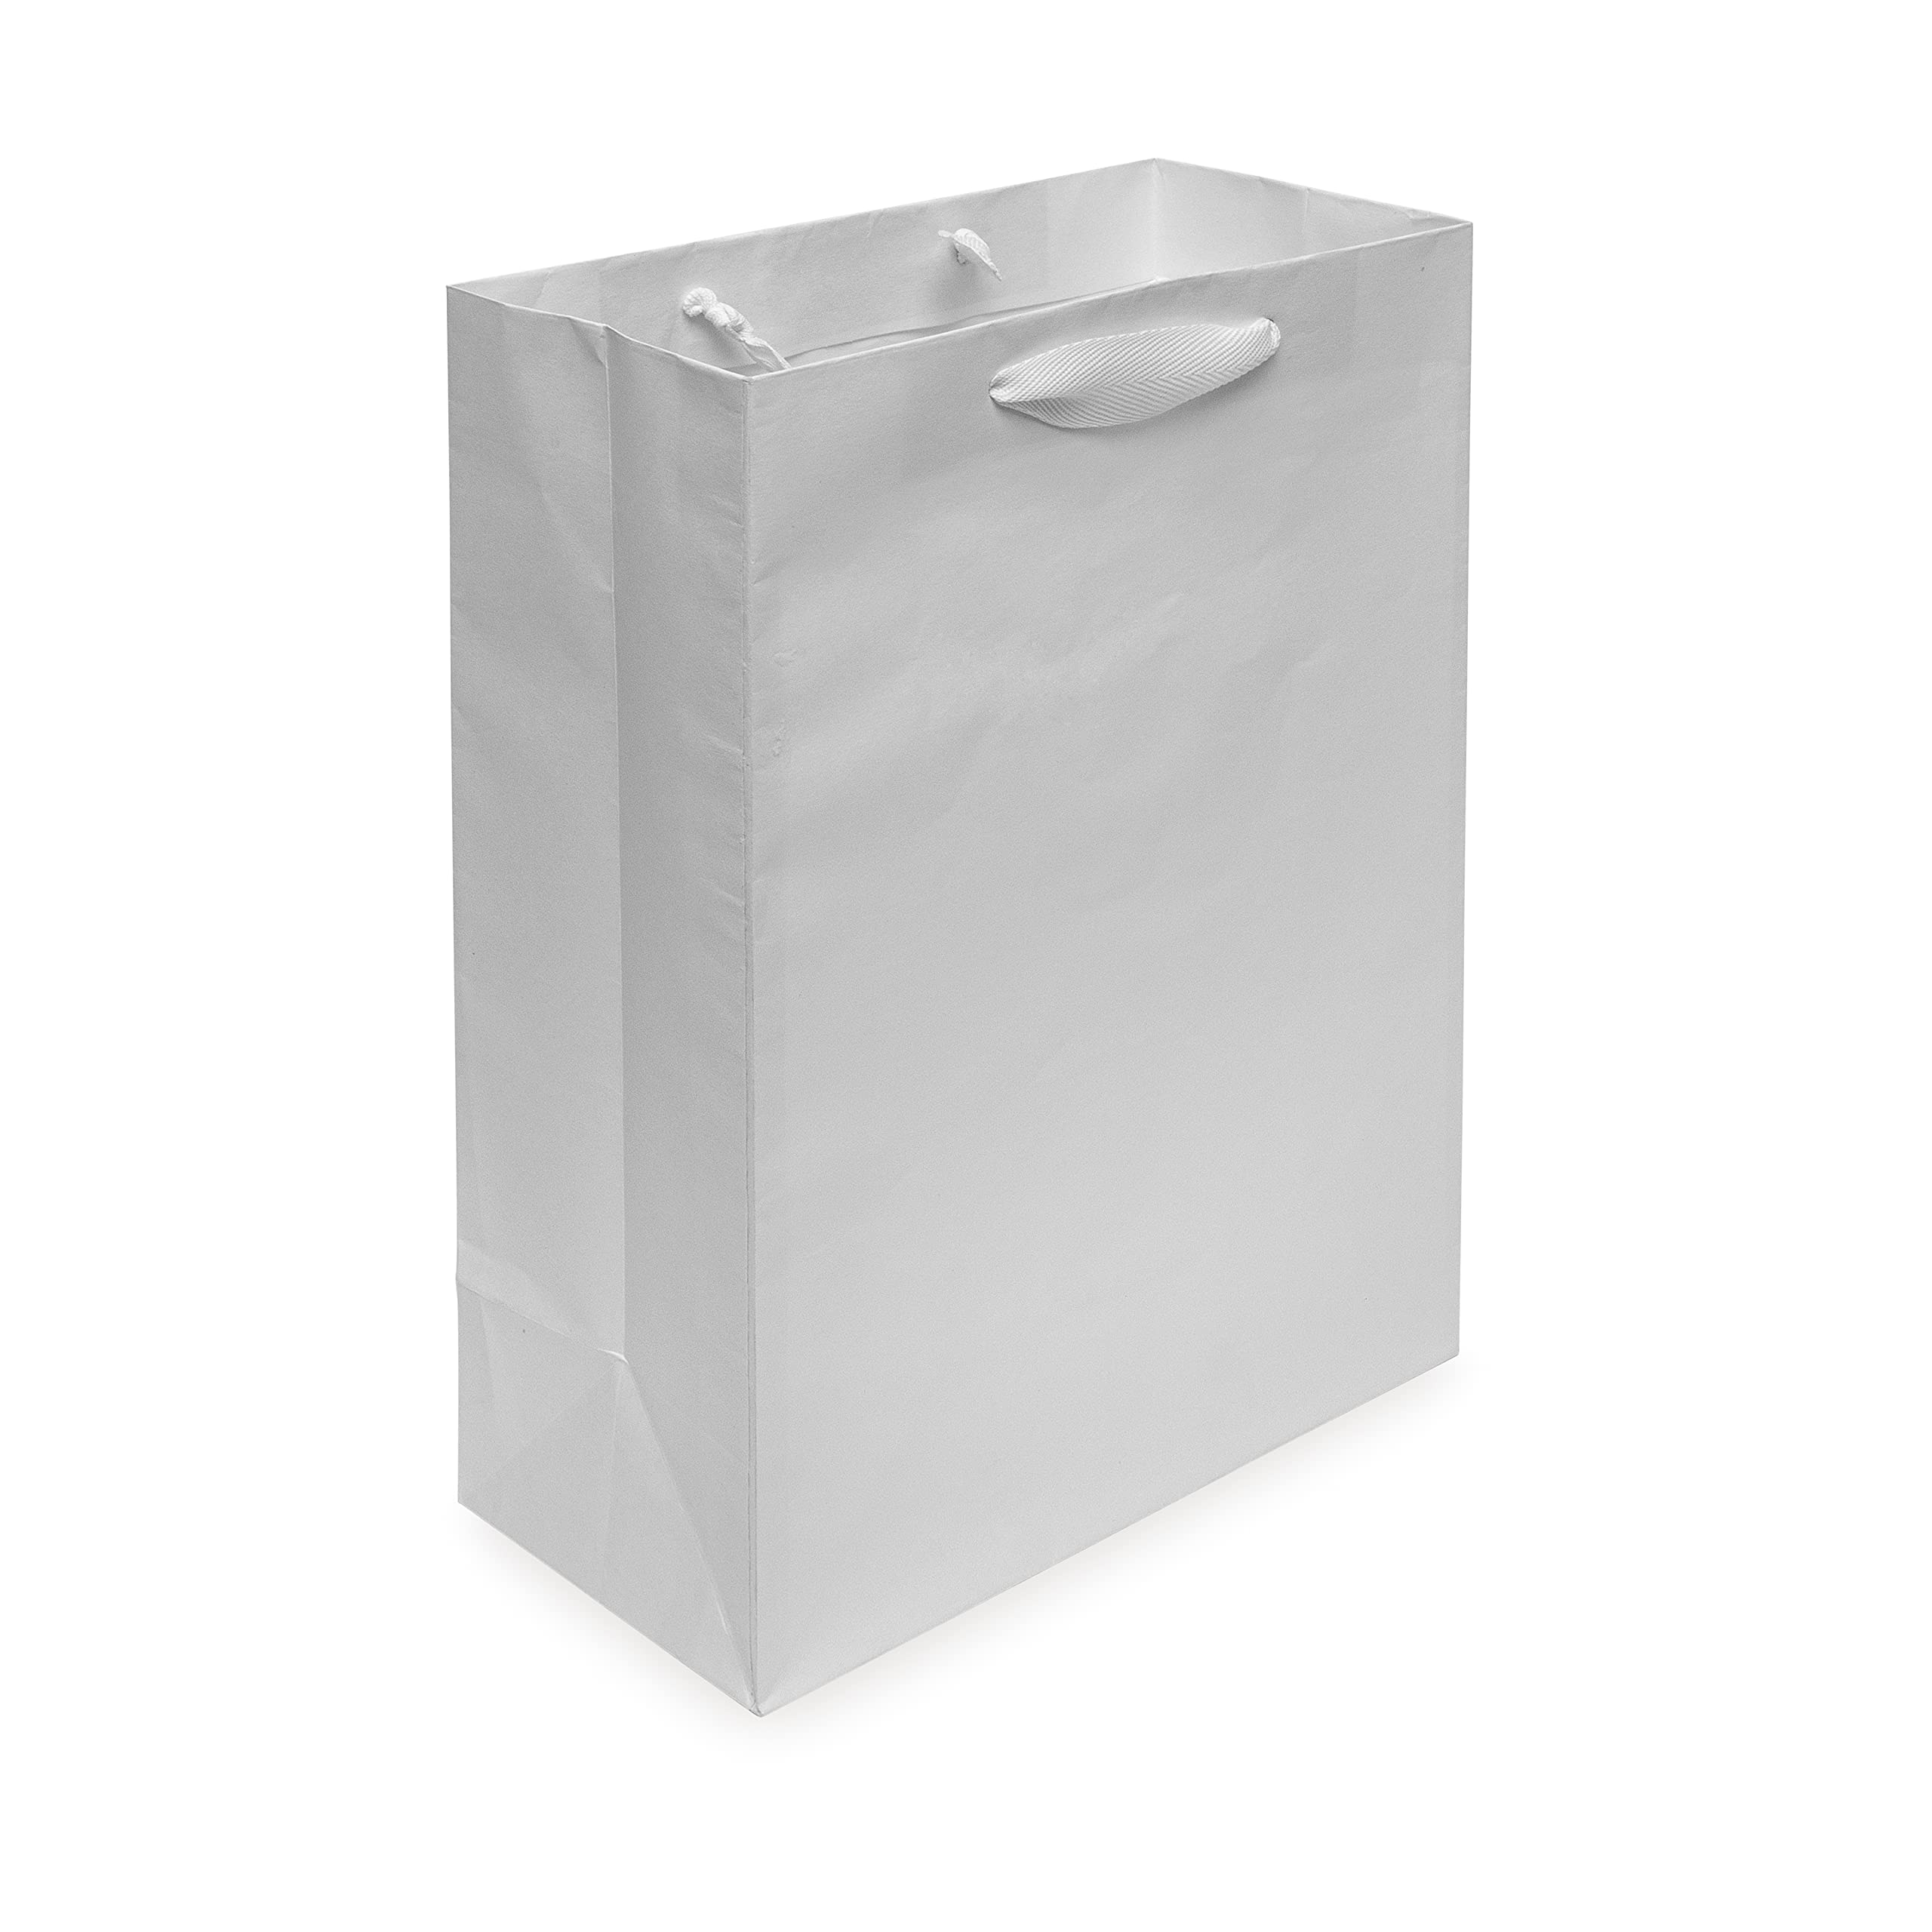 Prime Line Packaging 10x5x13 50 Pack White Gift Bags with Handles Bulk, Medium Kraft Paper Bags for Boutique, Shopping, Wedding, Birthday Gift Wrap